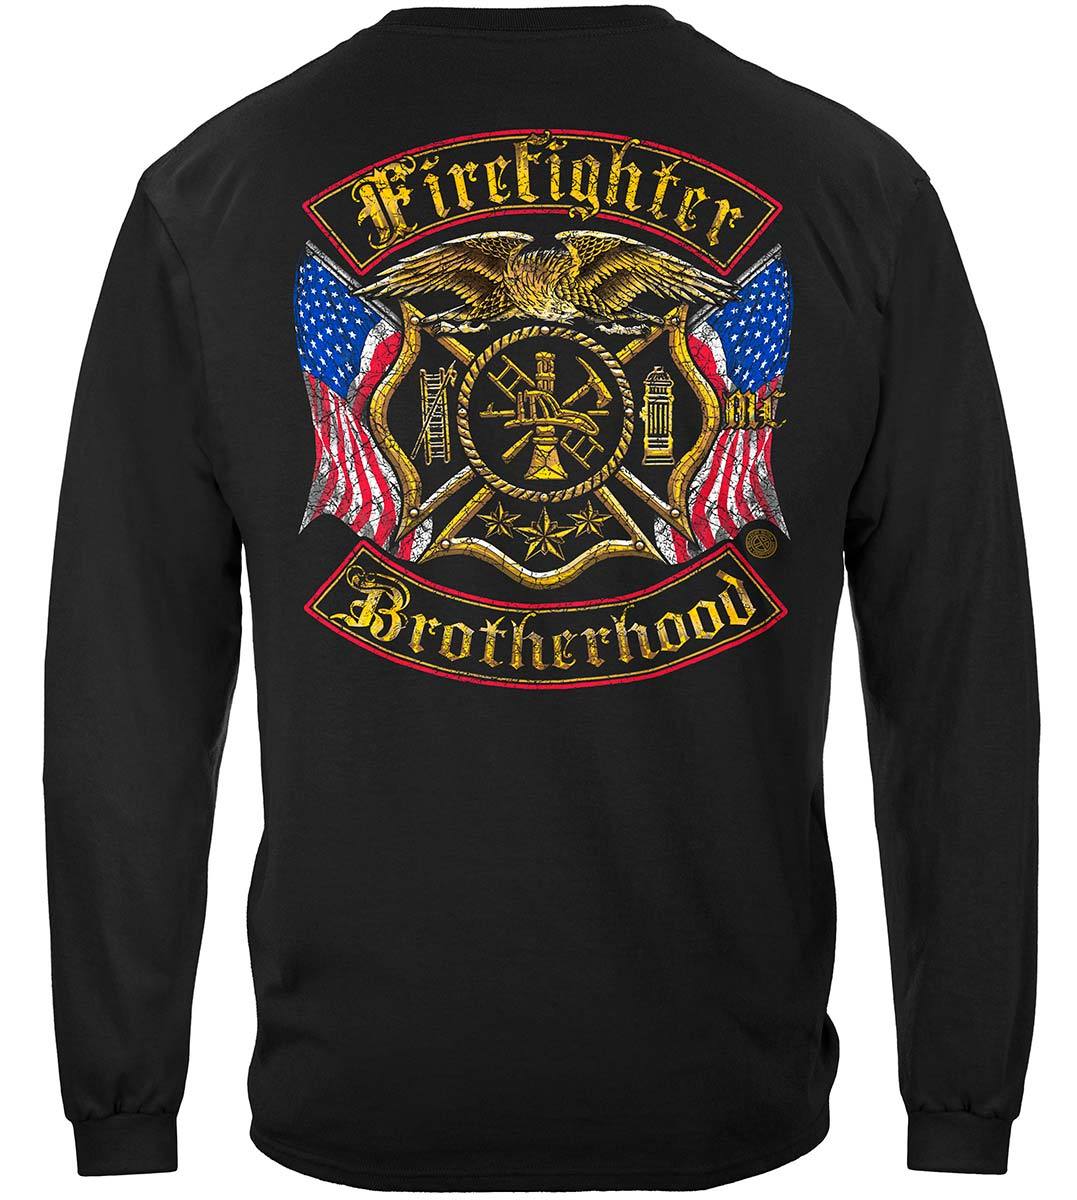 Firefighter Double Flagged Brotherhood Distressed Gold Foil Premium T-Shirt